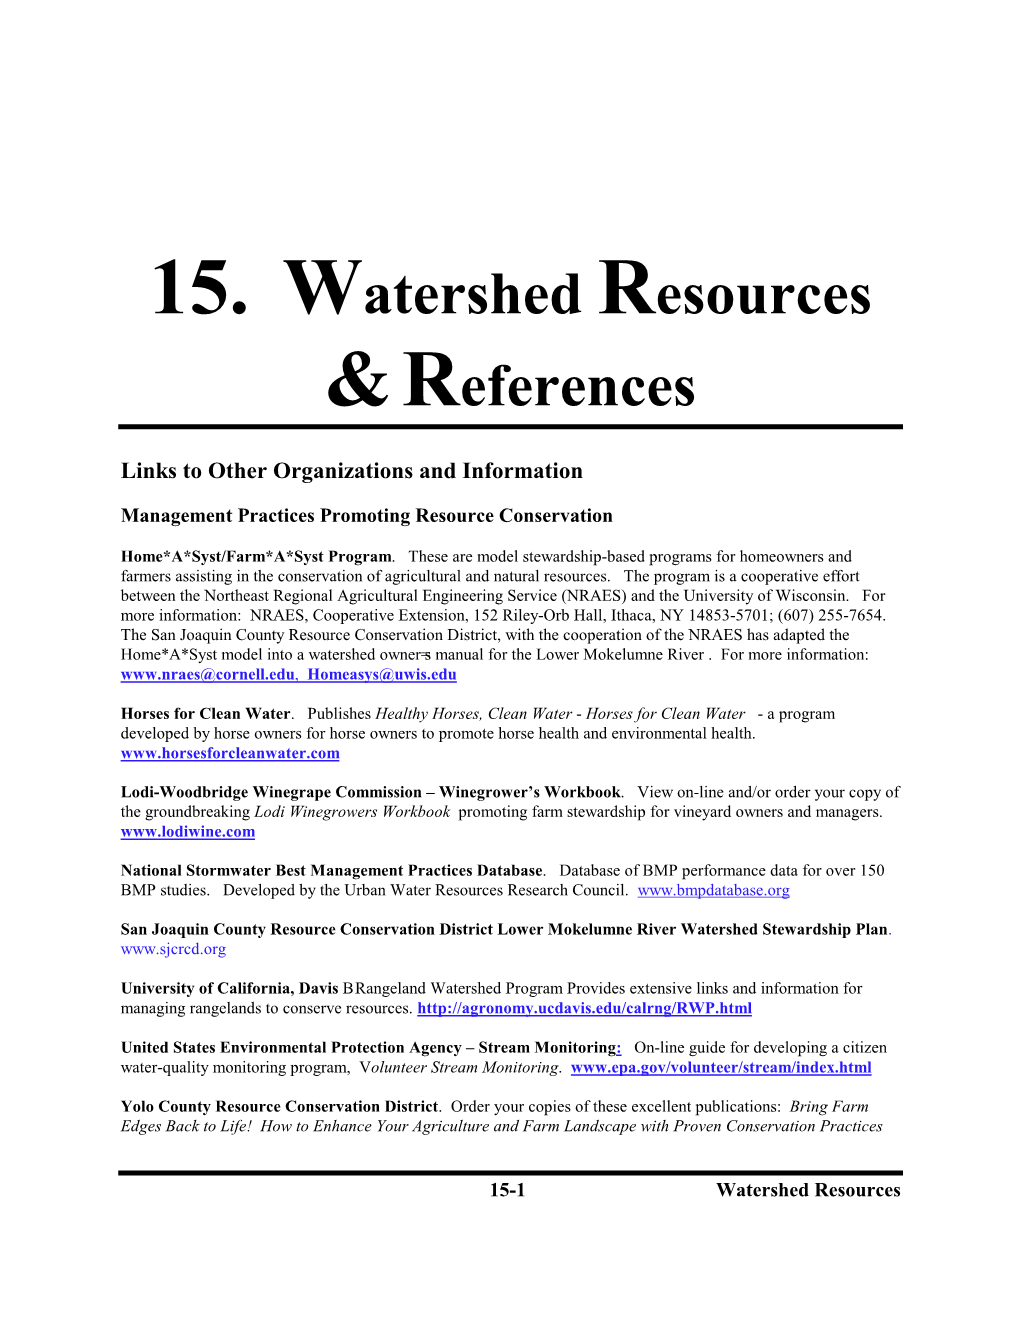 15. Watershed Resources &References